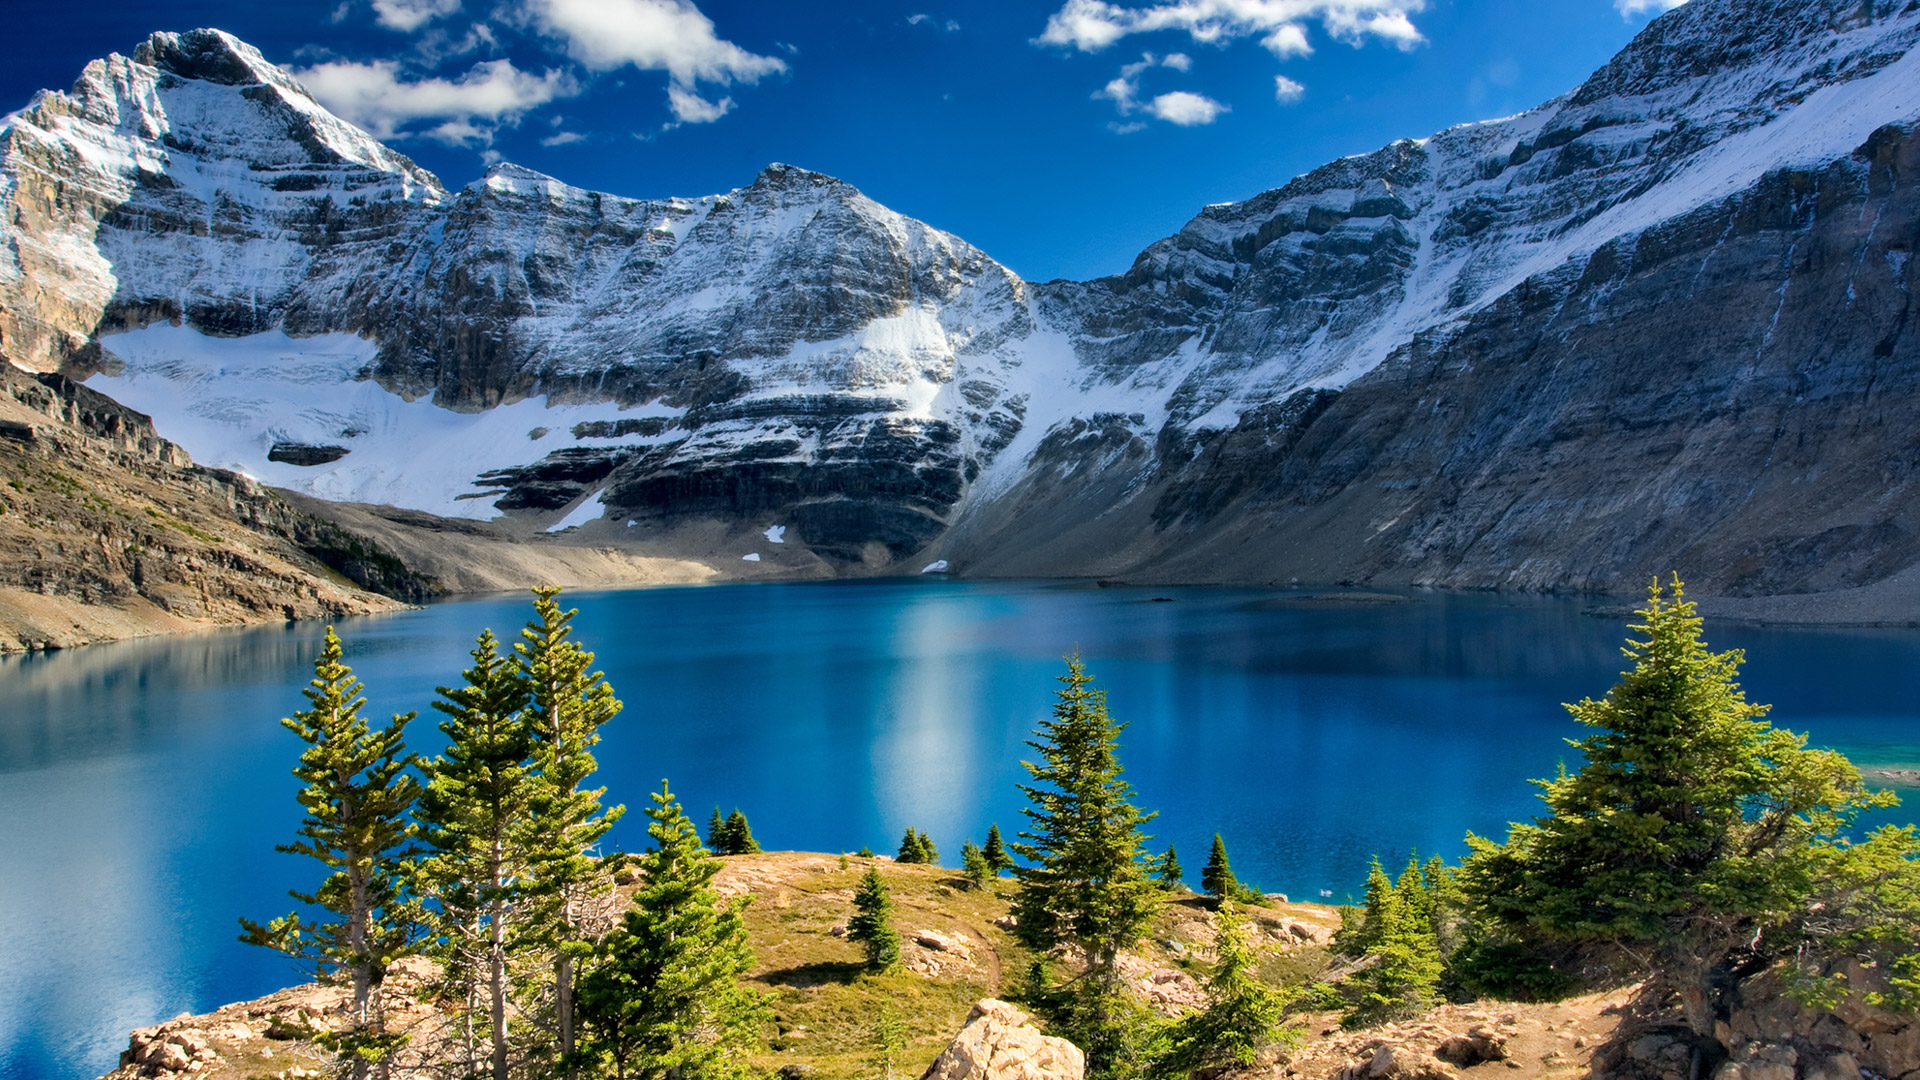 How To Download Mountain Lakes Nature HD Wallpapers (1920×1080 ...